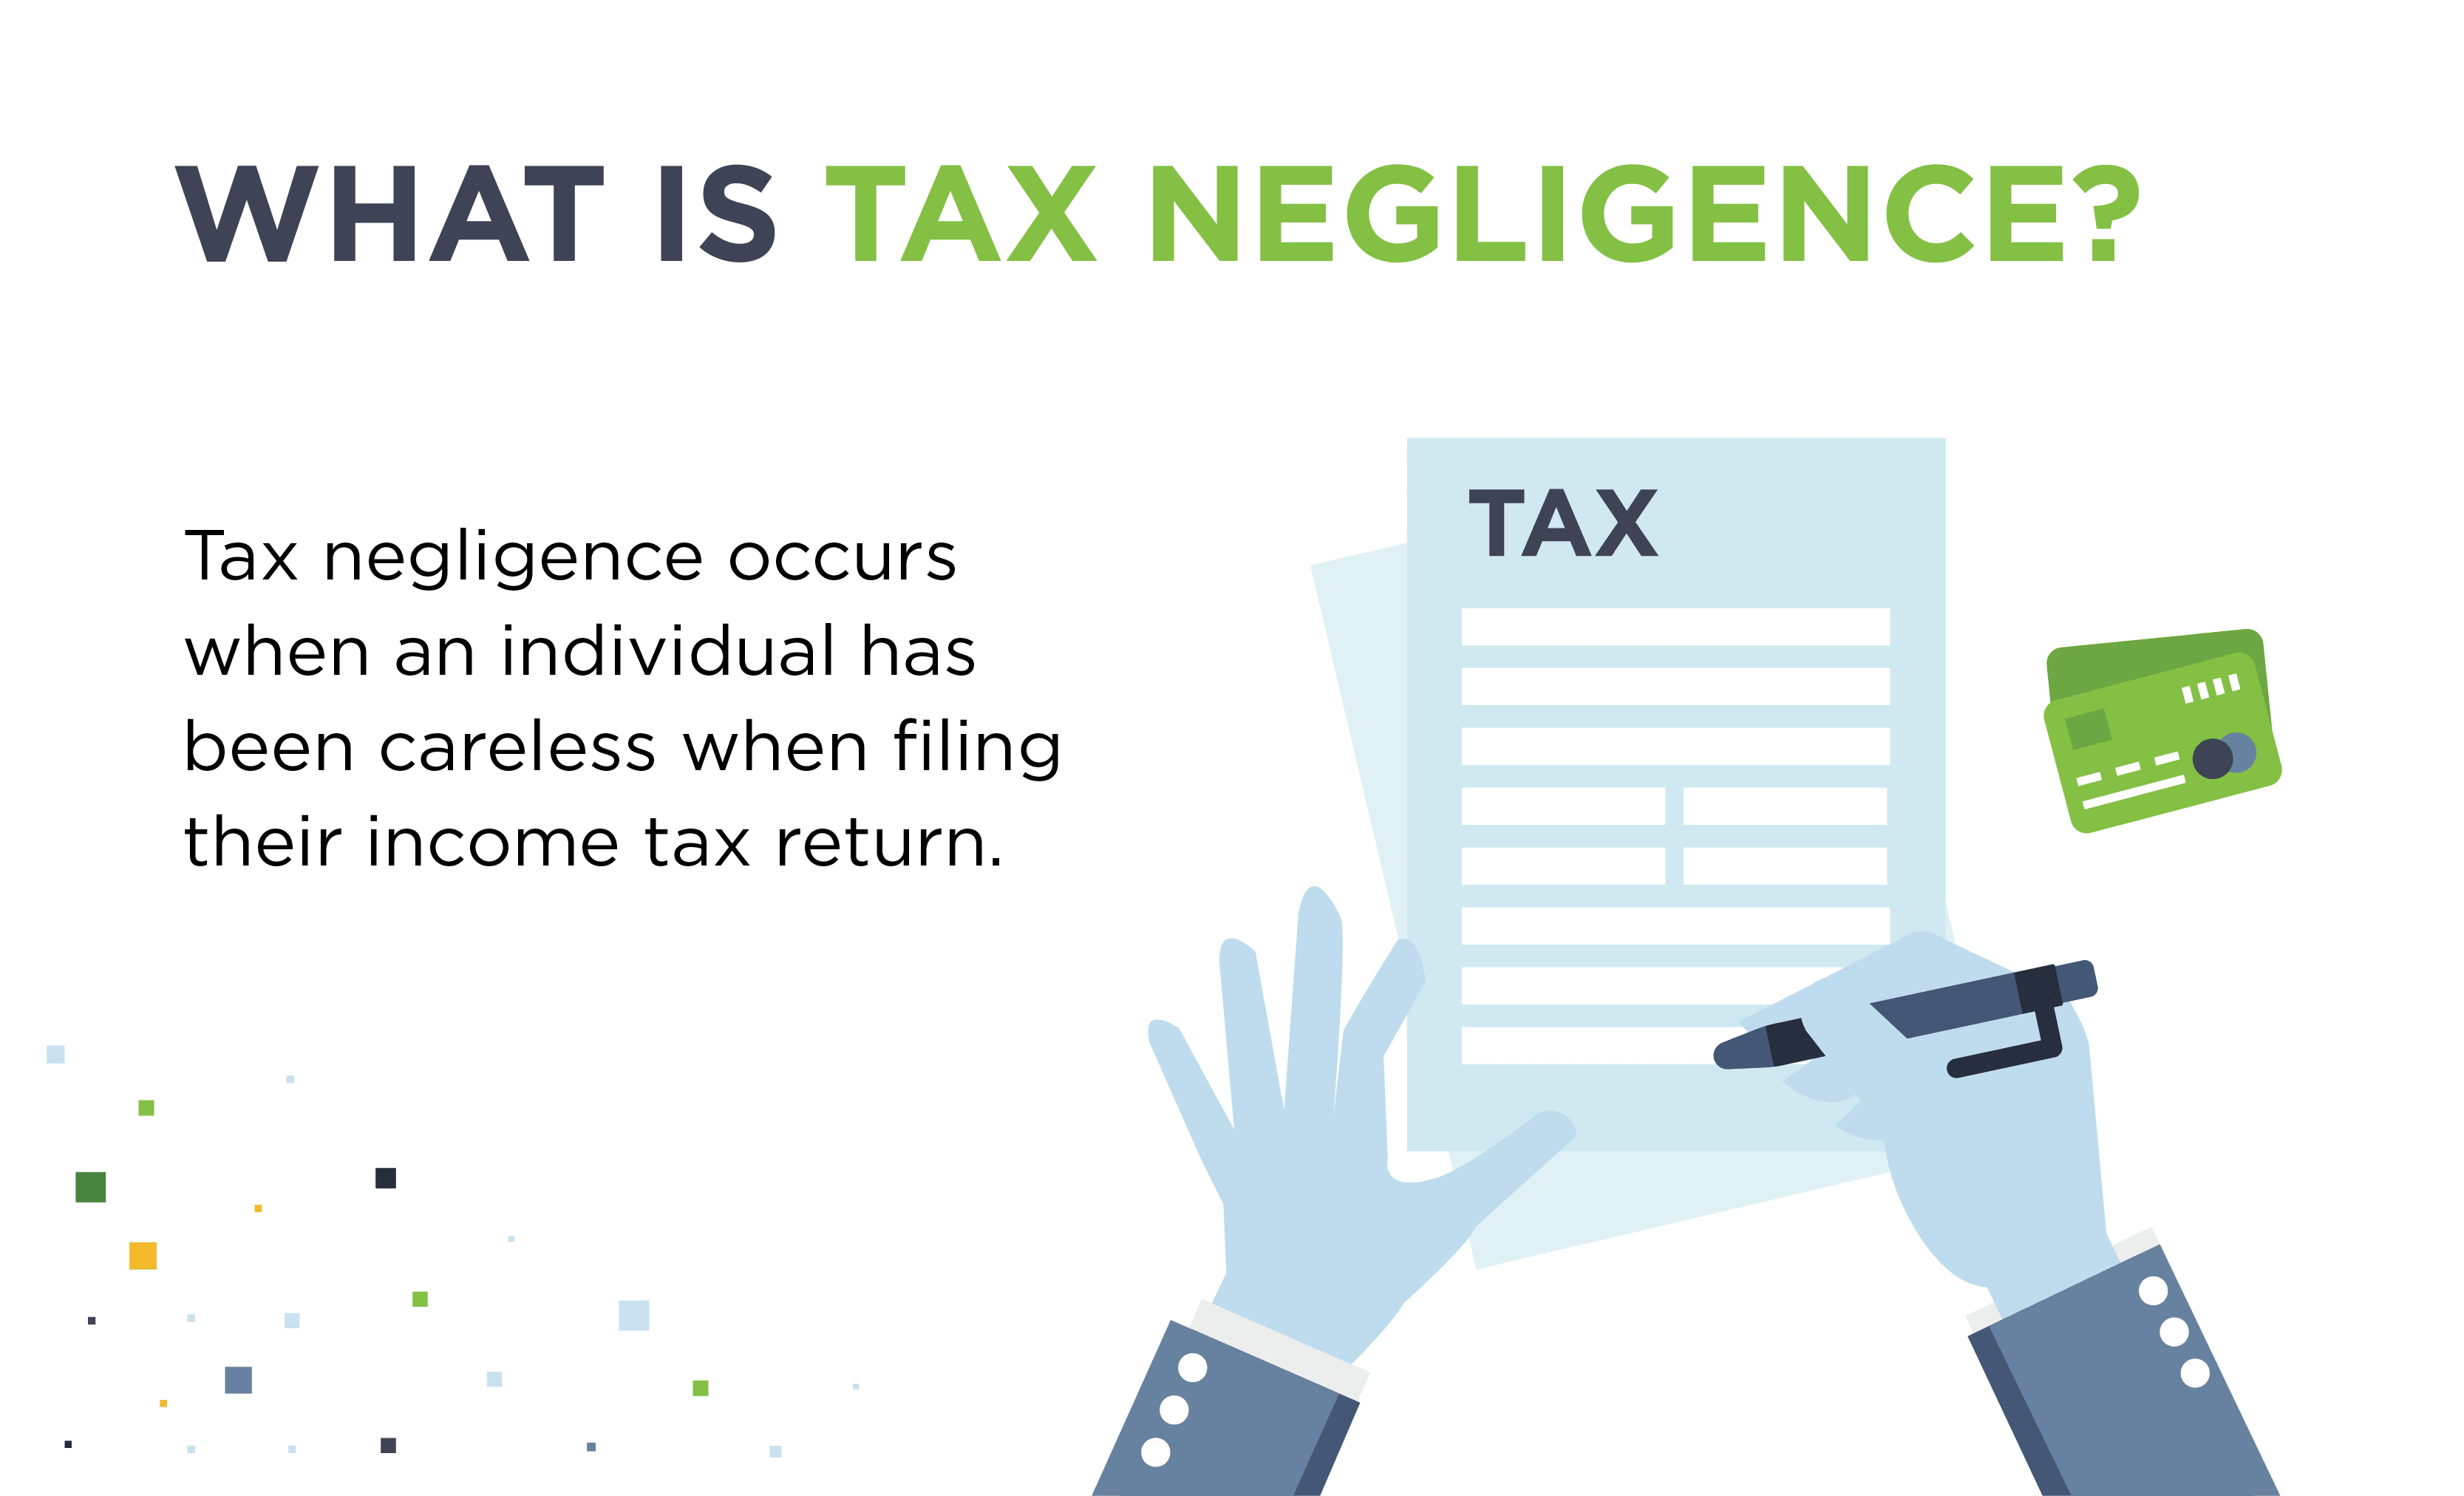 Definition of what tax negligence is with illustration of someone filling out tax forms.